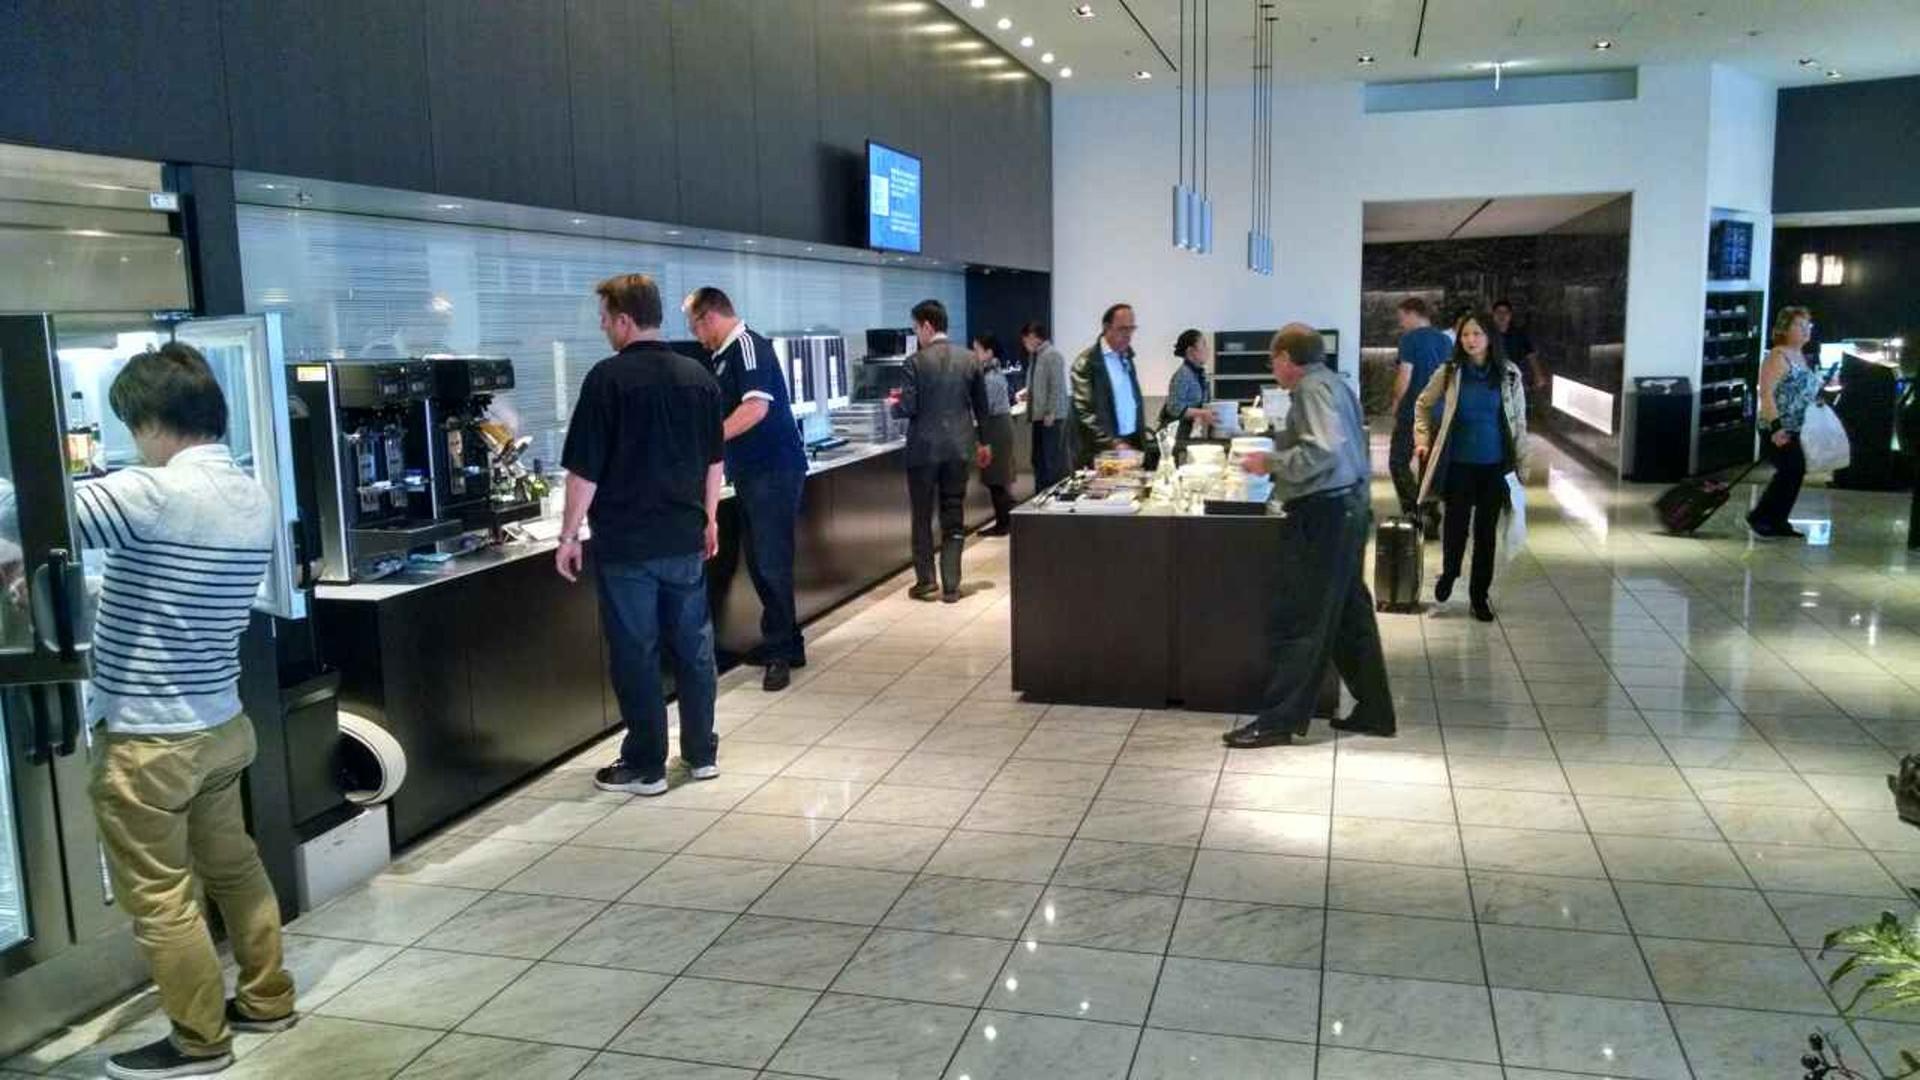 All Nippon Airways ANA Lounge image 23 of 39